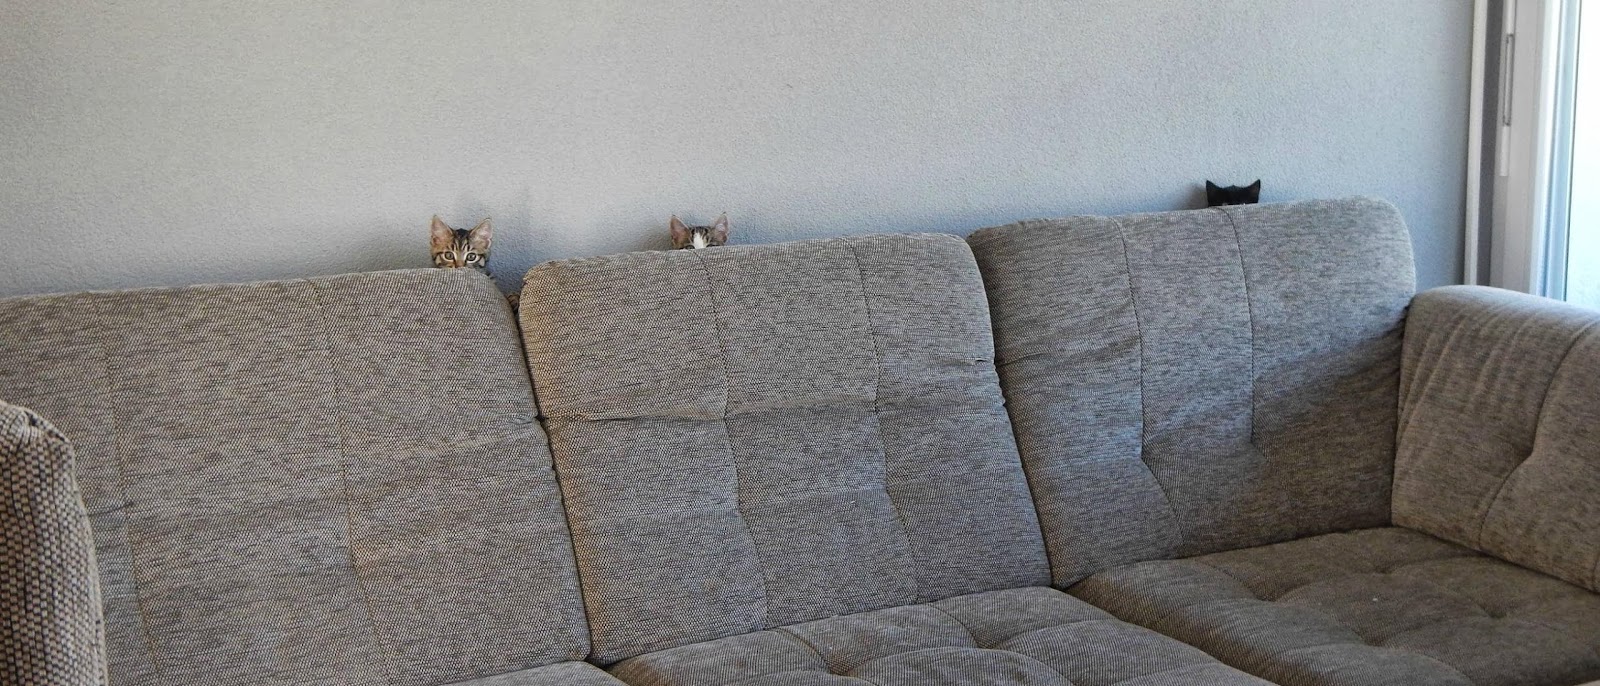 kittens-hiding-behind-couch.jpg